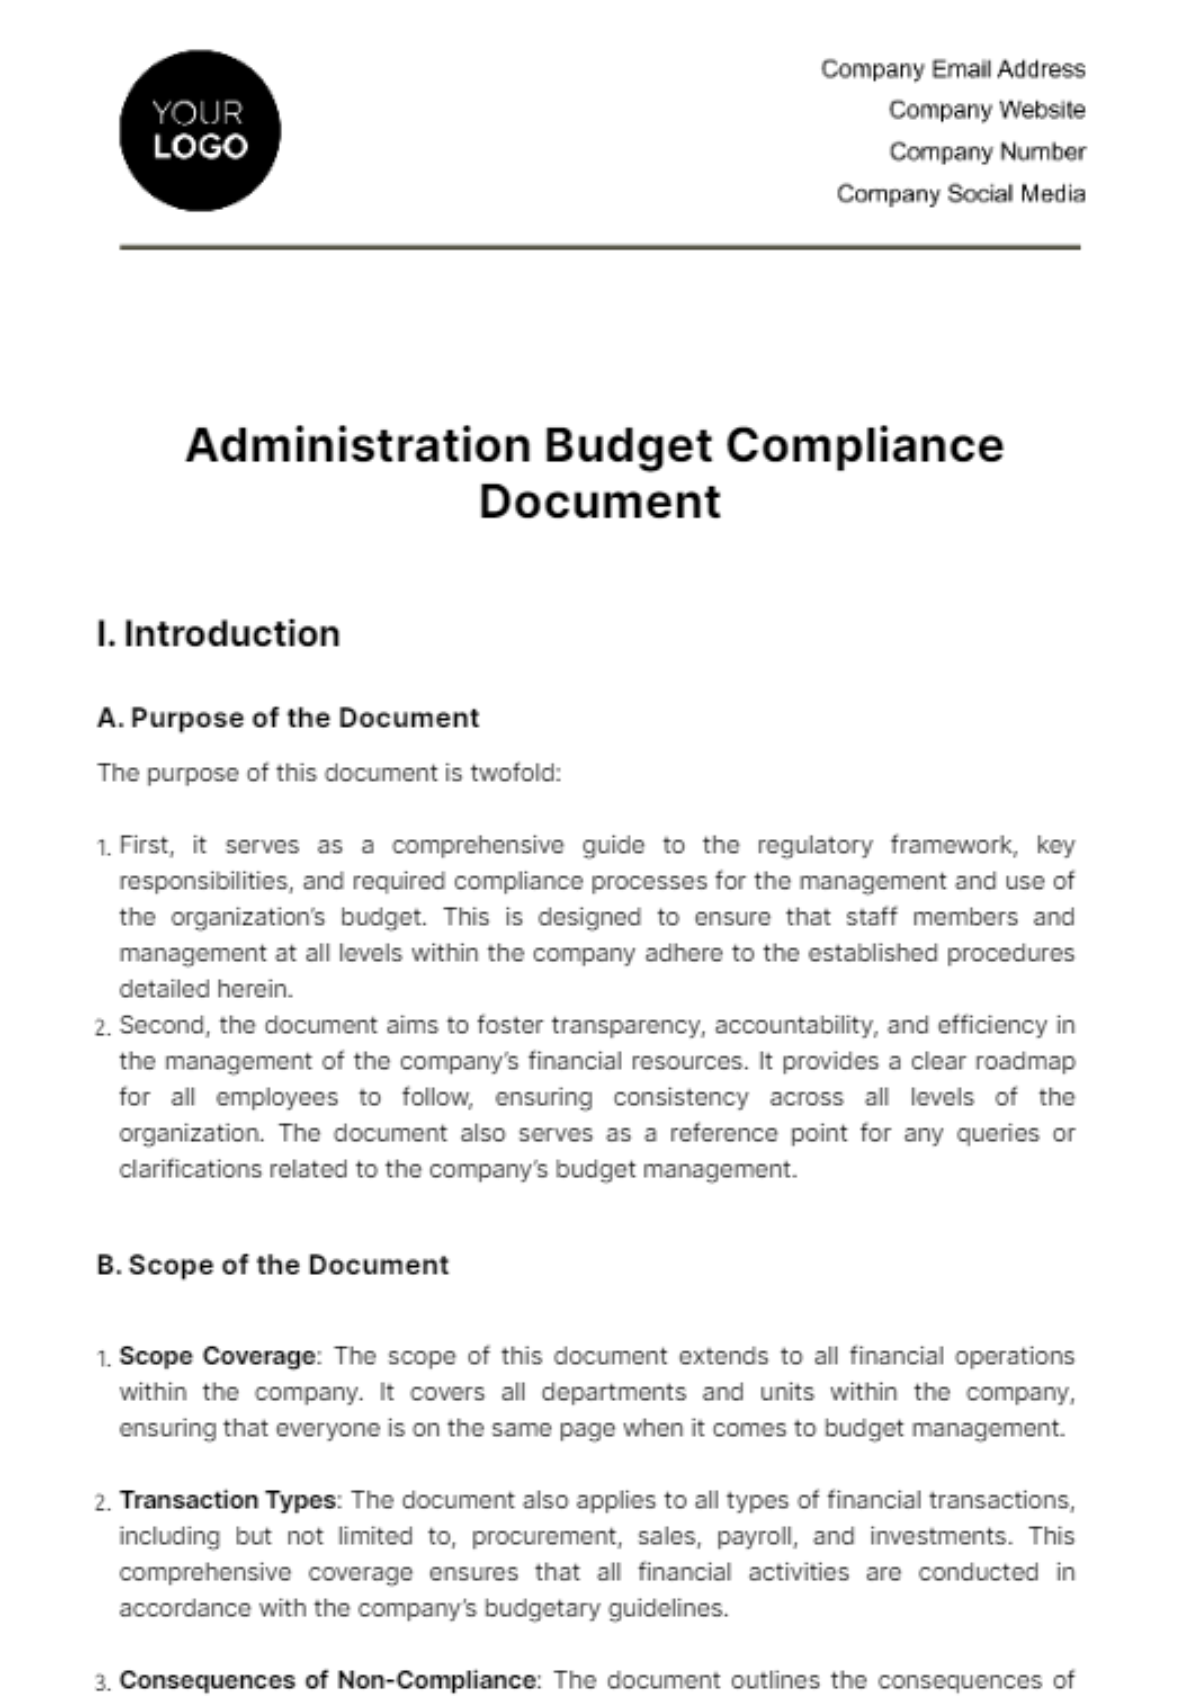 Free Administration Budget Compliance Document Template